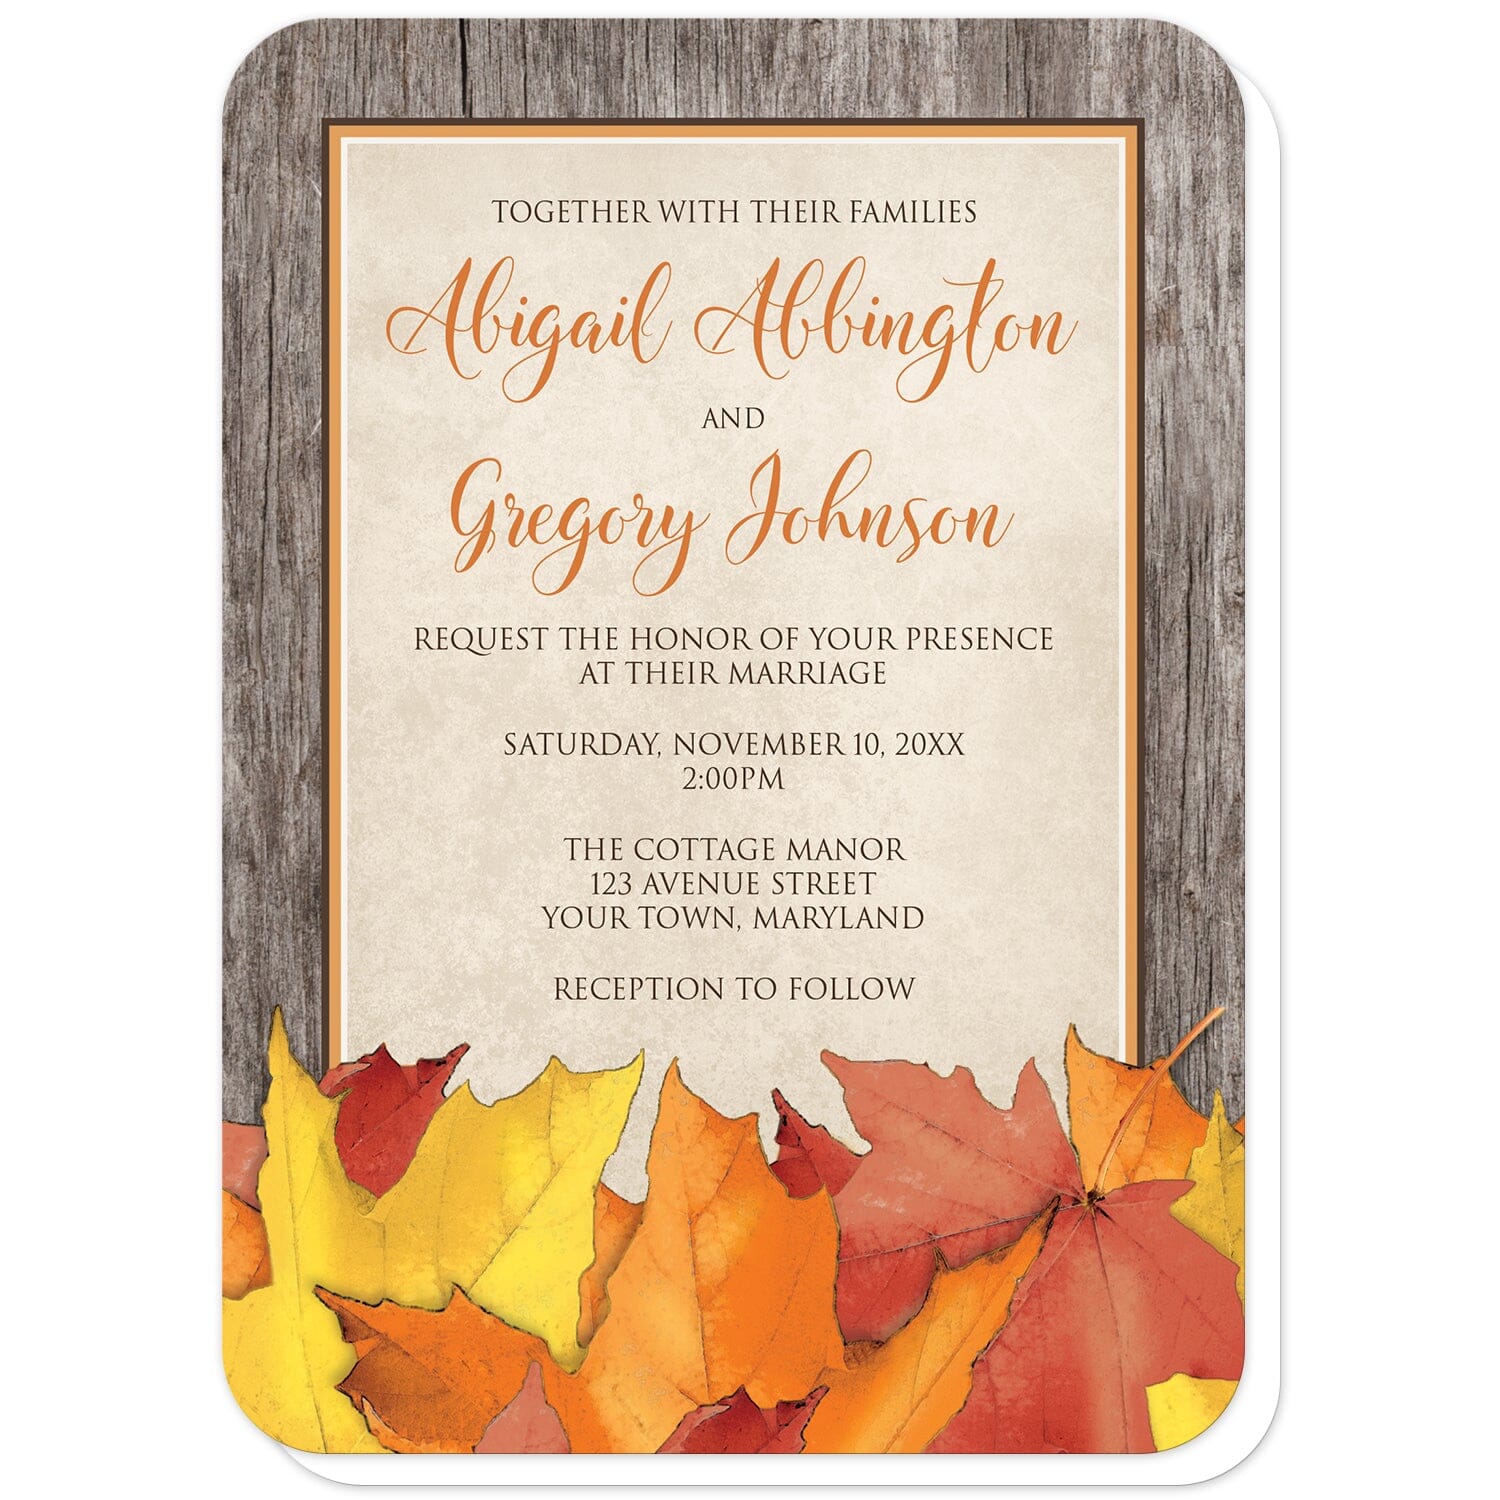 Rustic Wood and Leaves Fall Wedding Invitations (with rounded corners) at Artistically Invited. Country-inspired rustic wood and leaves fall wedding invitations with an arrangement of rustic yellow, orange, and red autumn leaves along the bottom. Your personalized marriage celebration details are custom printed in orange and brown over a beige parchment center frame area, outlined in orange and brown, with a brown wood border design. 